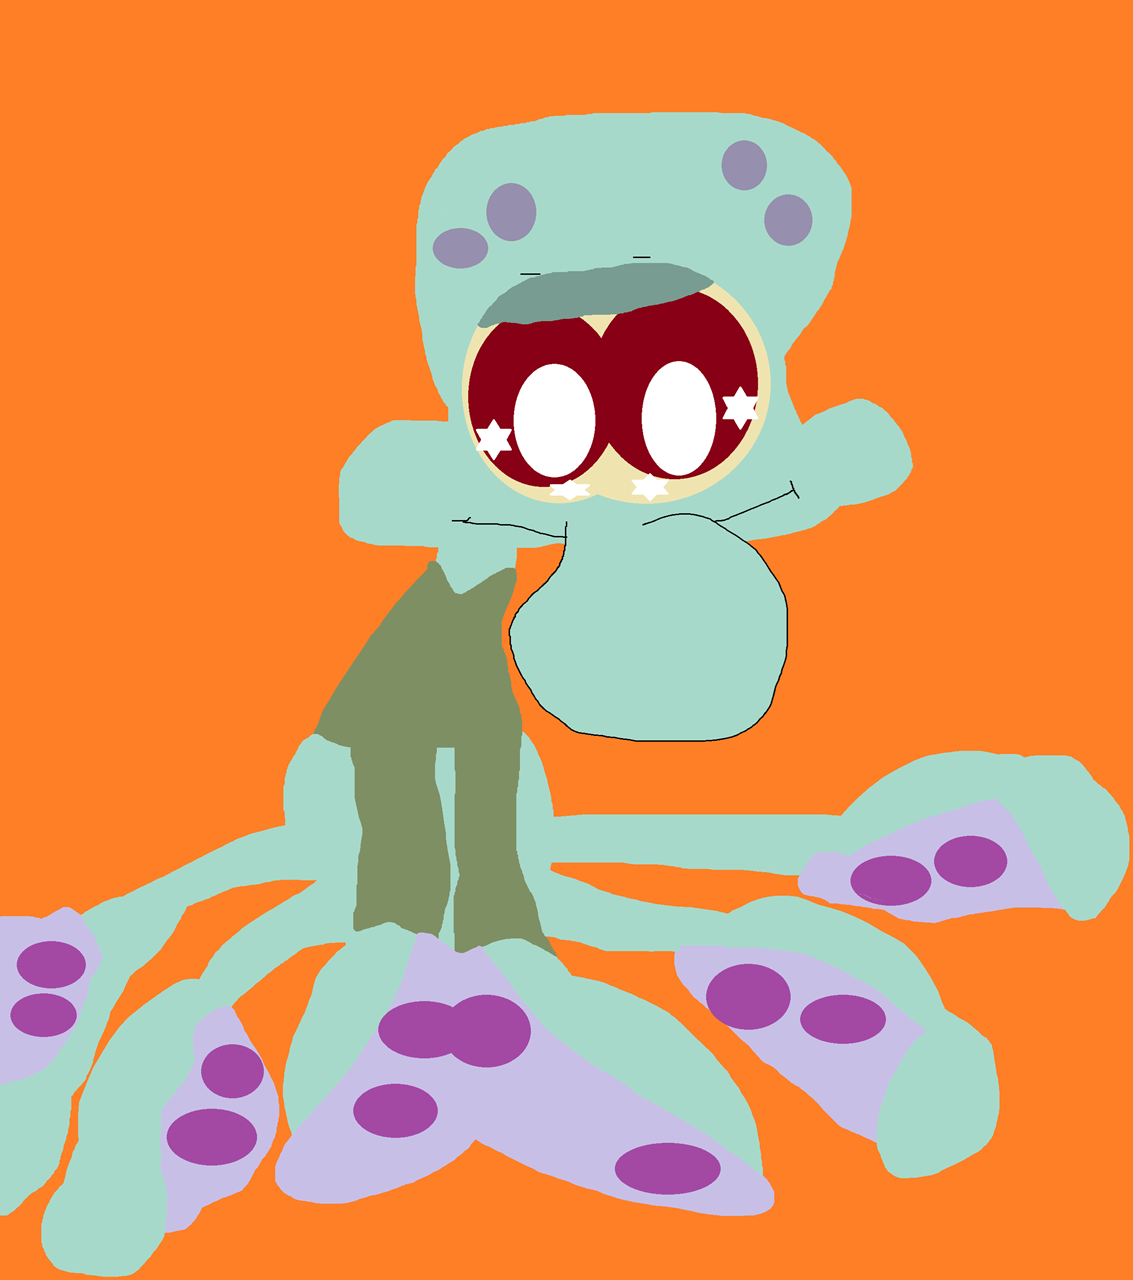 A Mix Of My Two Fave Squidward Plush Yet Again^^ by Falconlobo